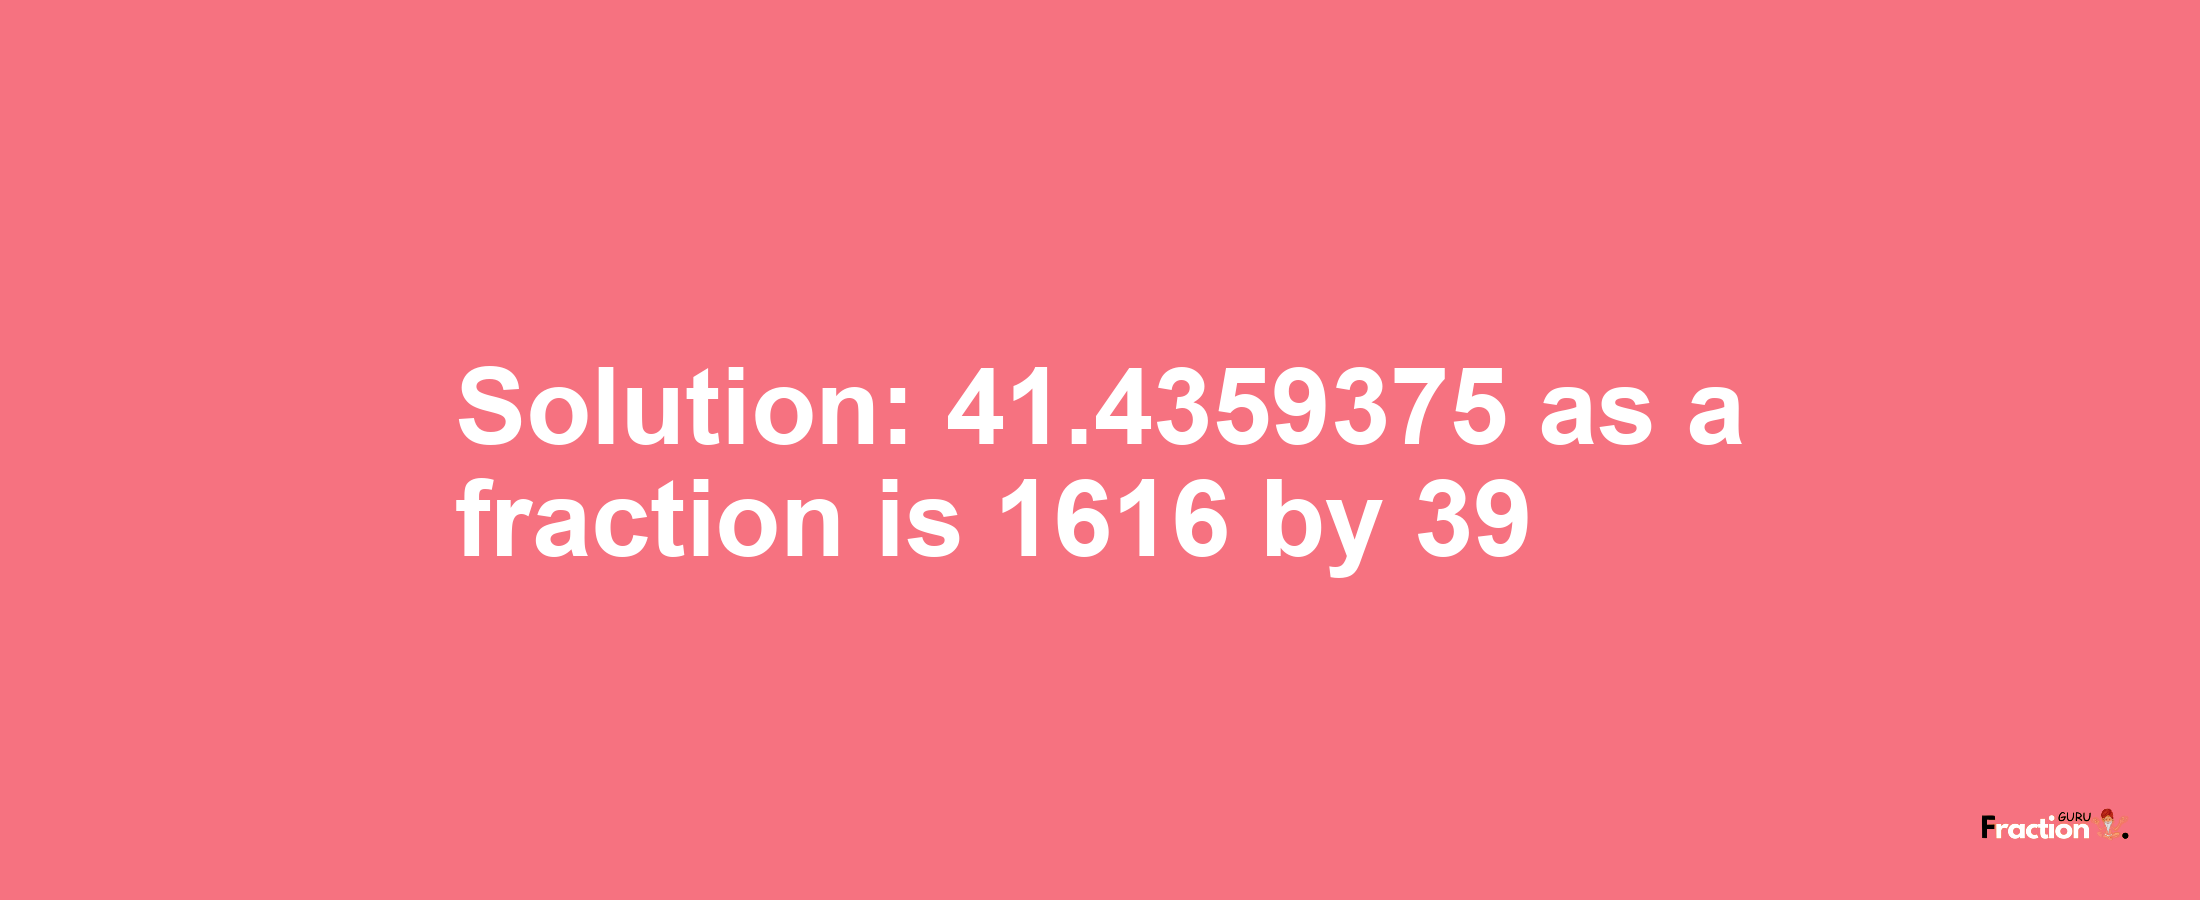 Solution:41.4359375 as a fraction is 1616/39